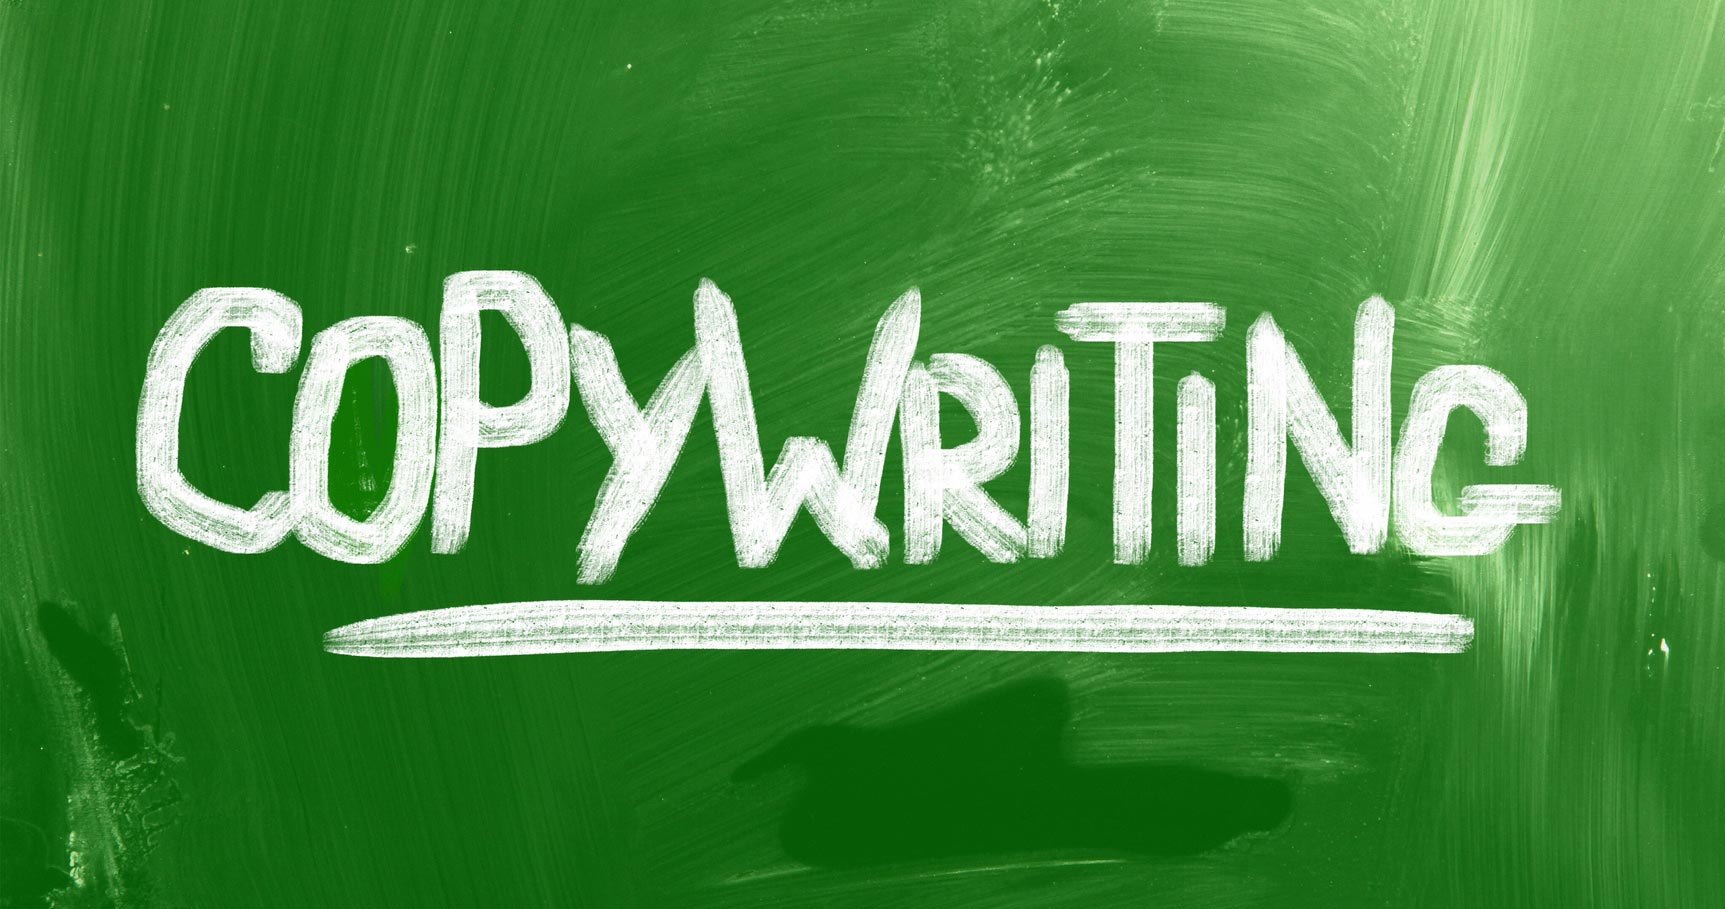 Writers -Tips to Make the Switch to Copywriting